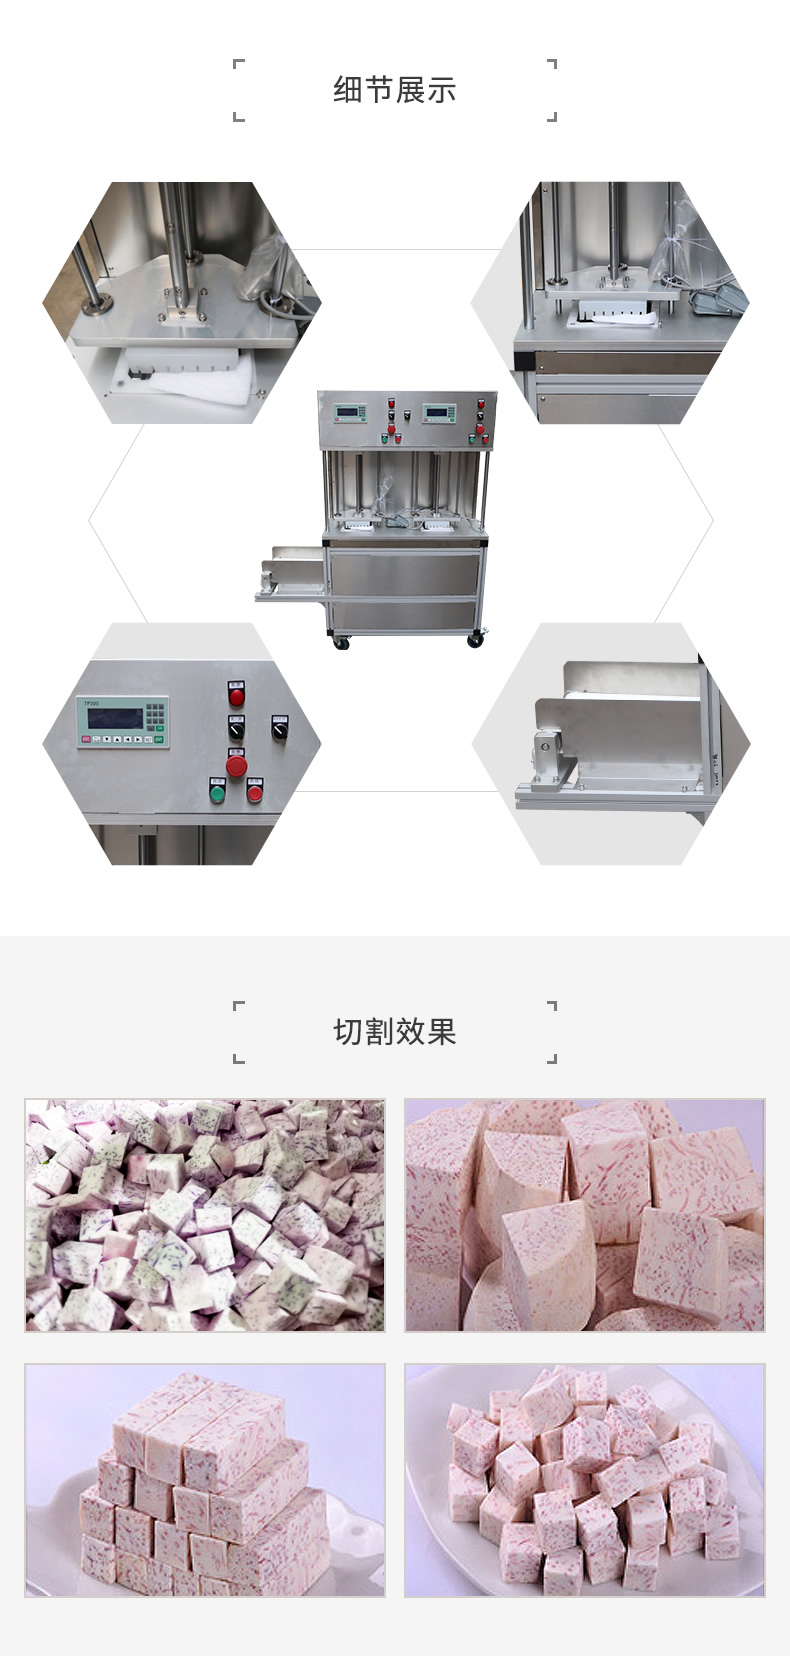 What are the uses and advantages of the dicing machine?